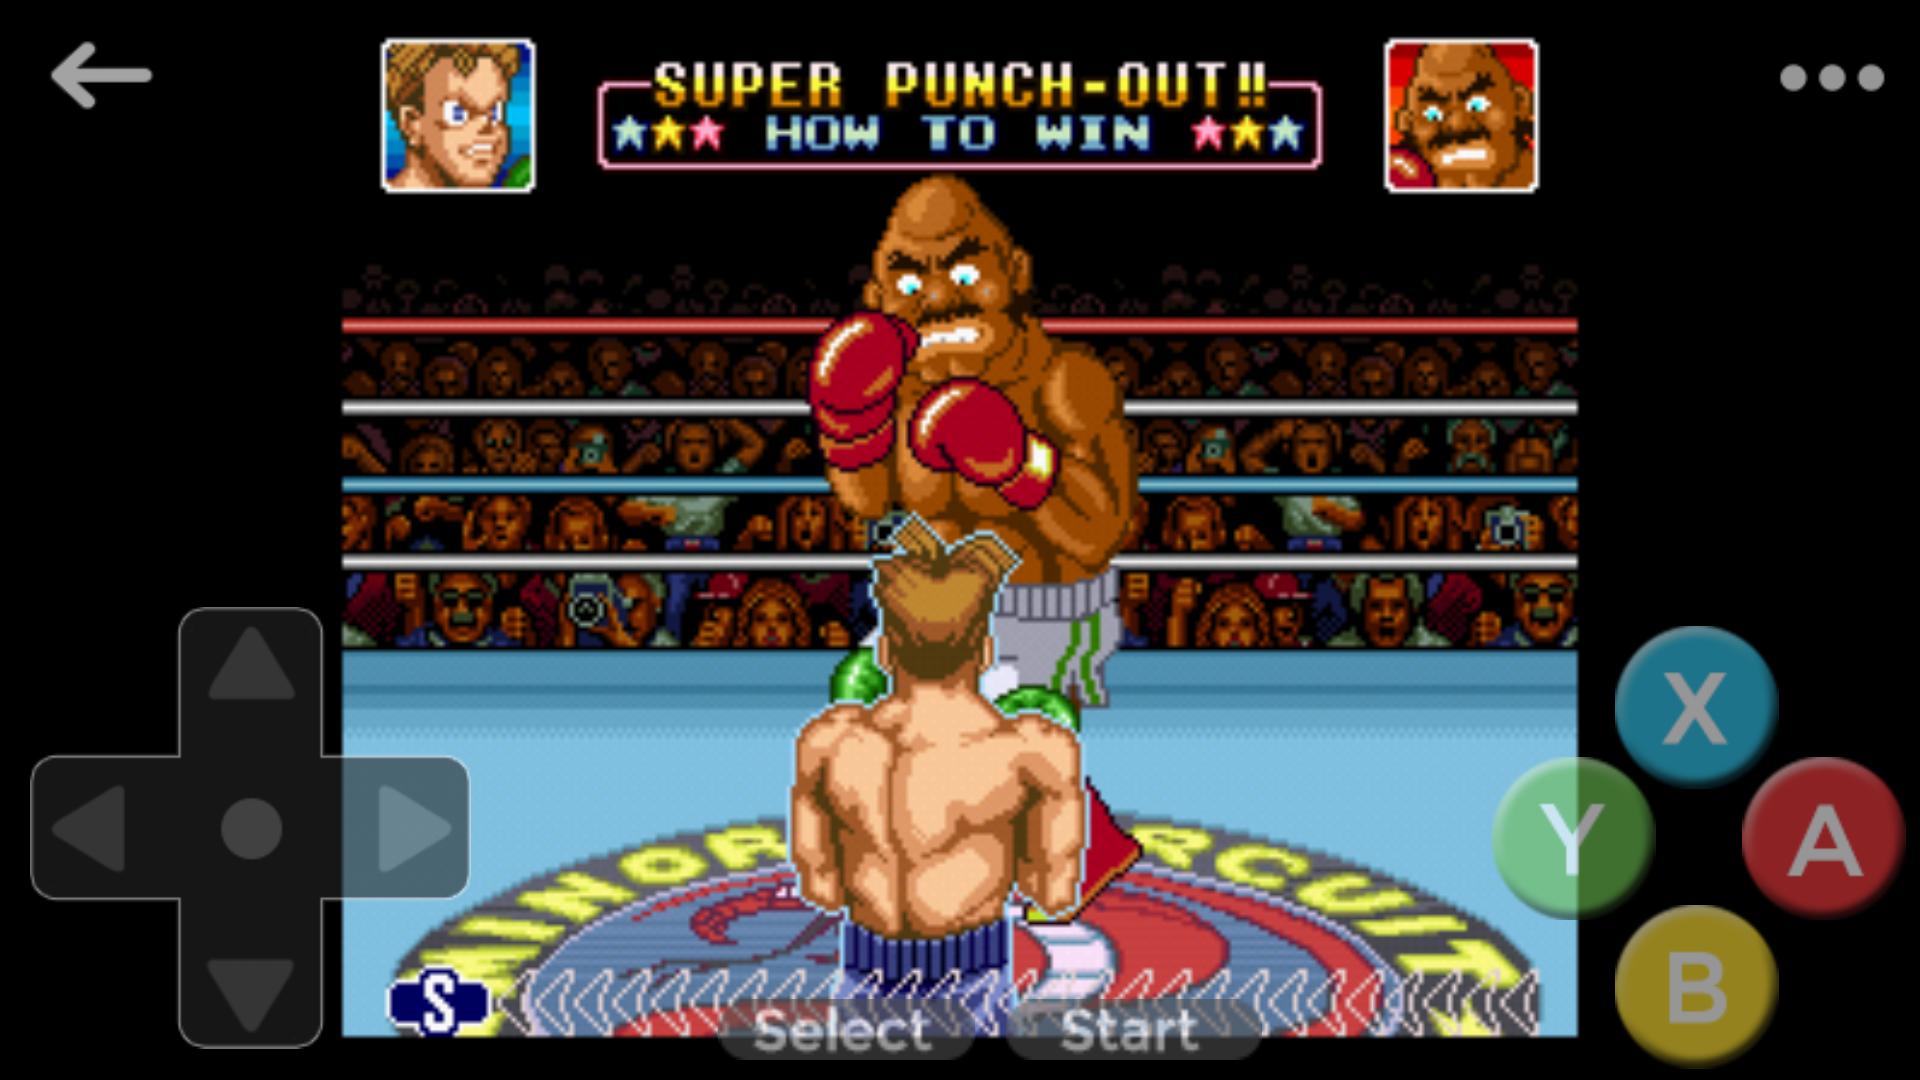 Guide For Super Punch Out Snes Classic Game For Android - super punch out roblox